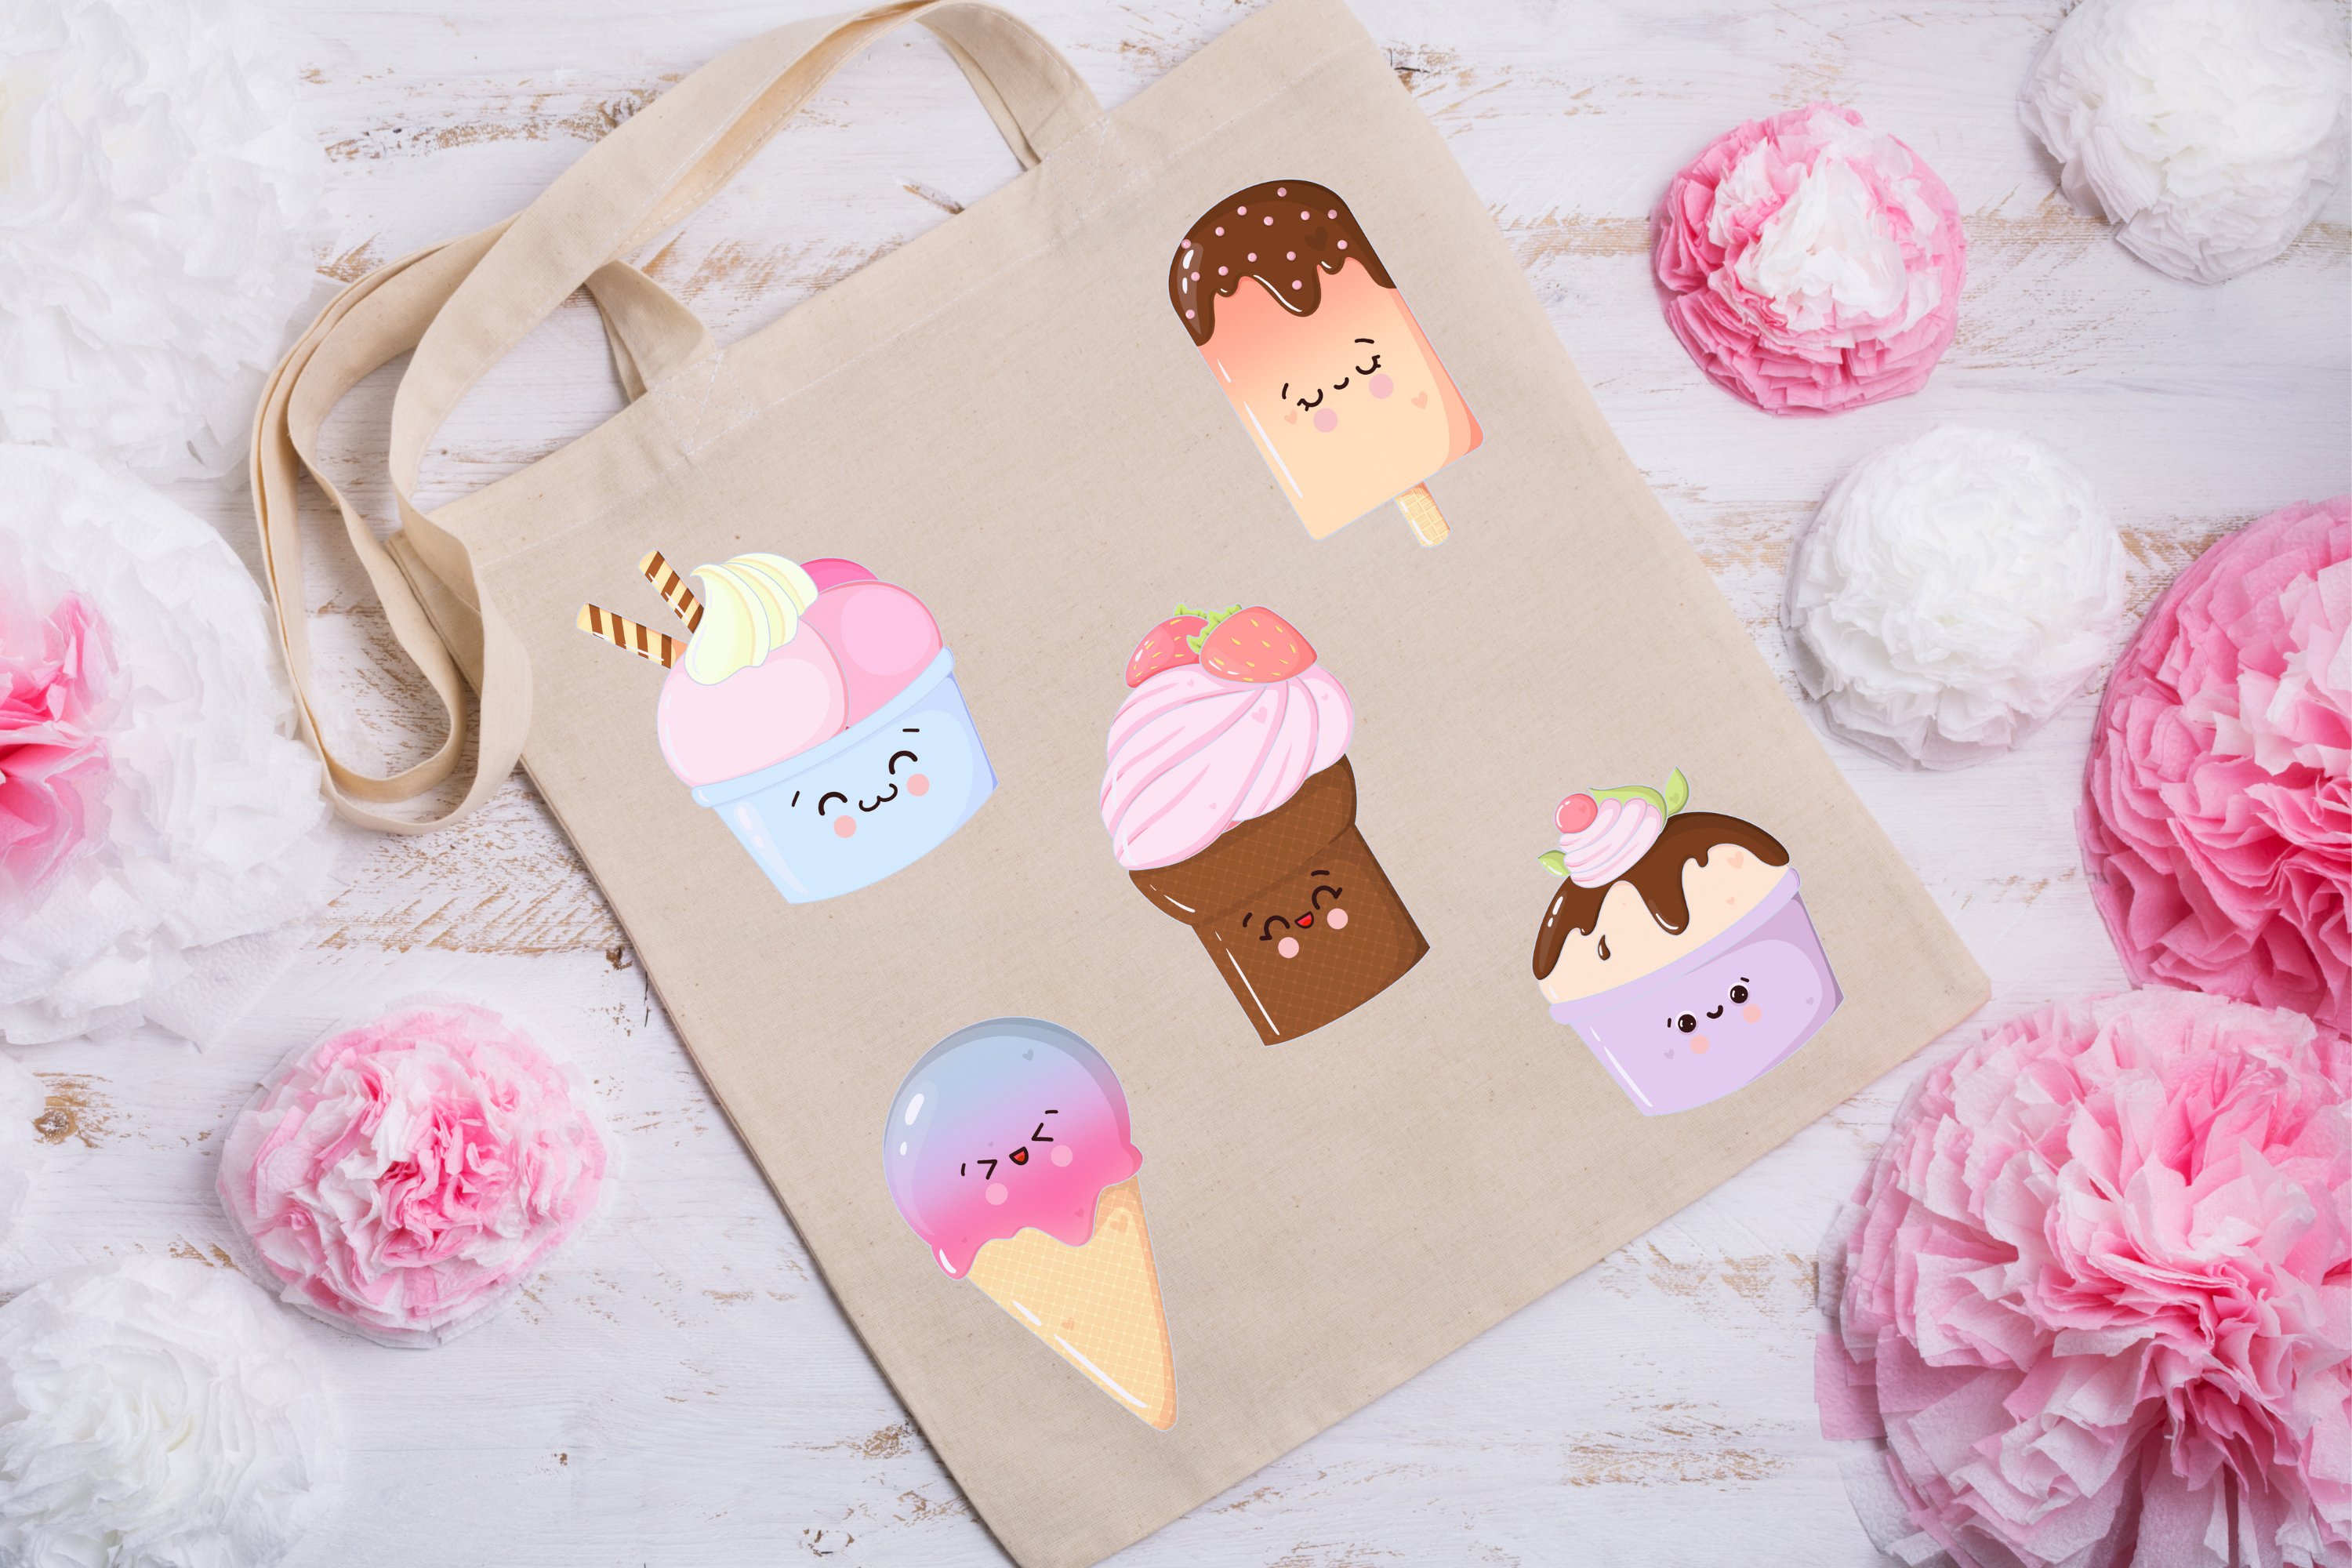 Beige shopping bag with 5 colorful illustrations of ice cream on the white background with pink and white flowers.